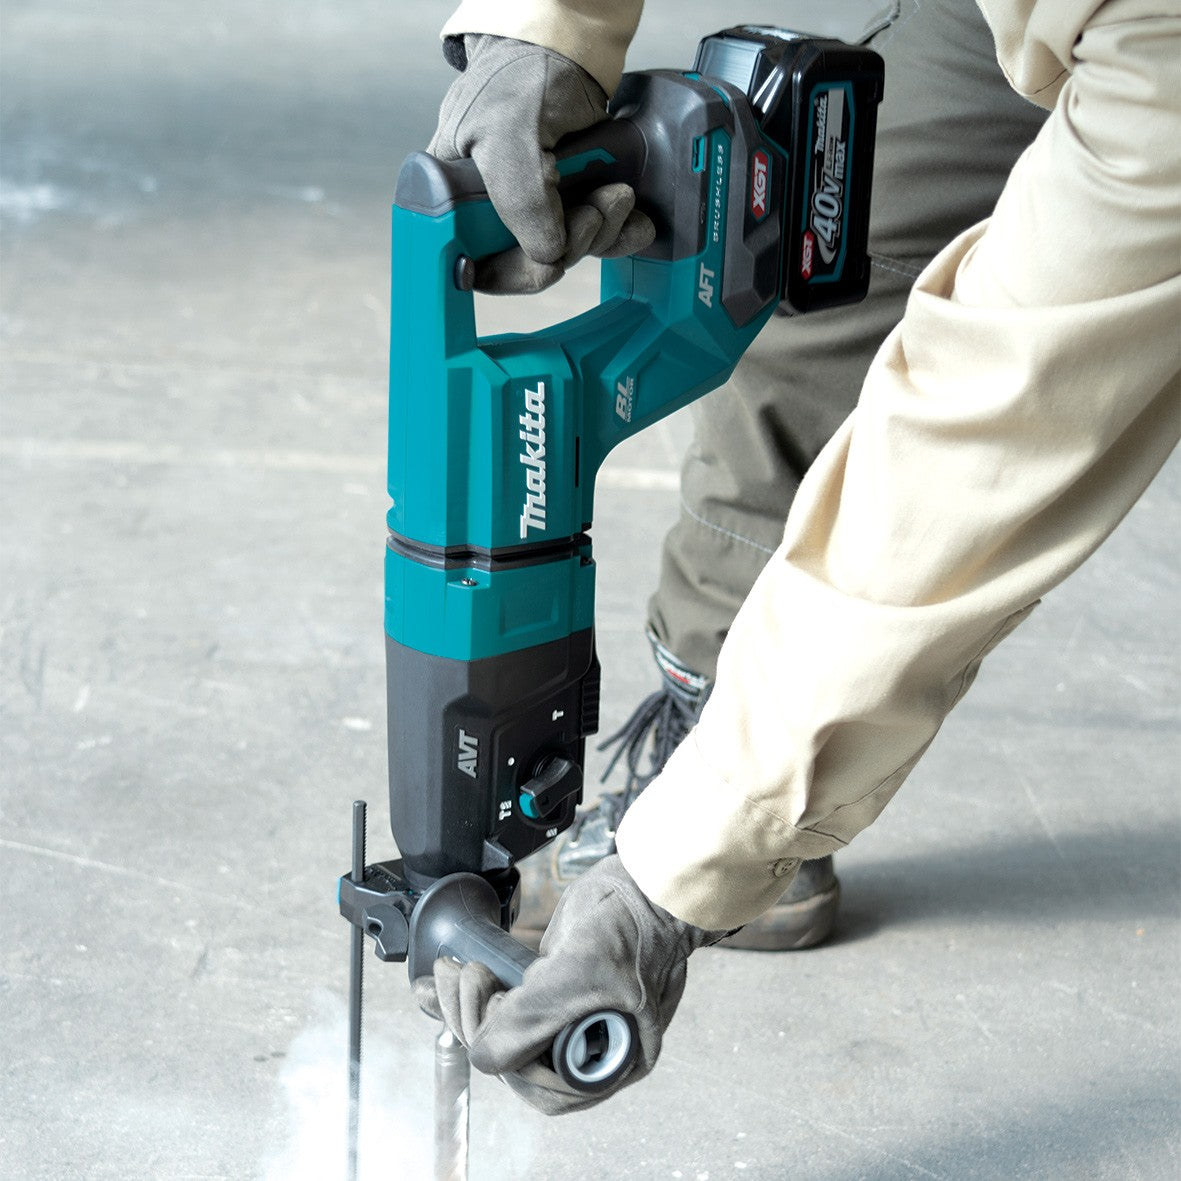 40V 28mm Brushless SDS Plus Rotary Hammer Bare (Tool Only) HR007GZ by Makita